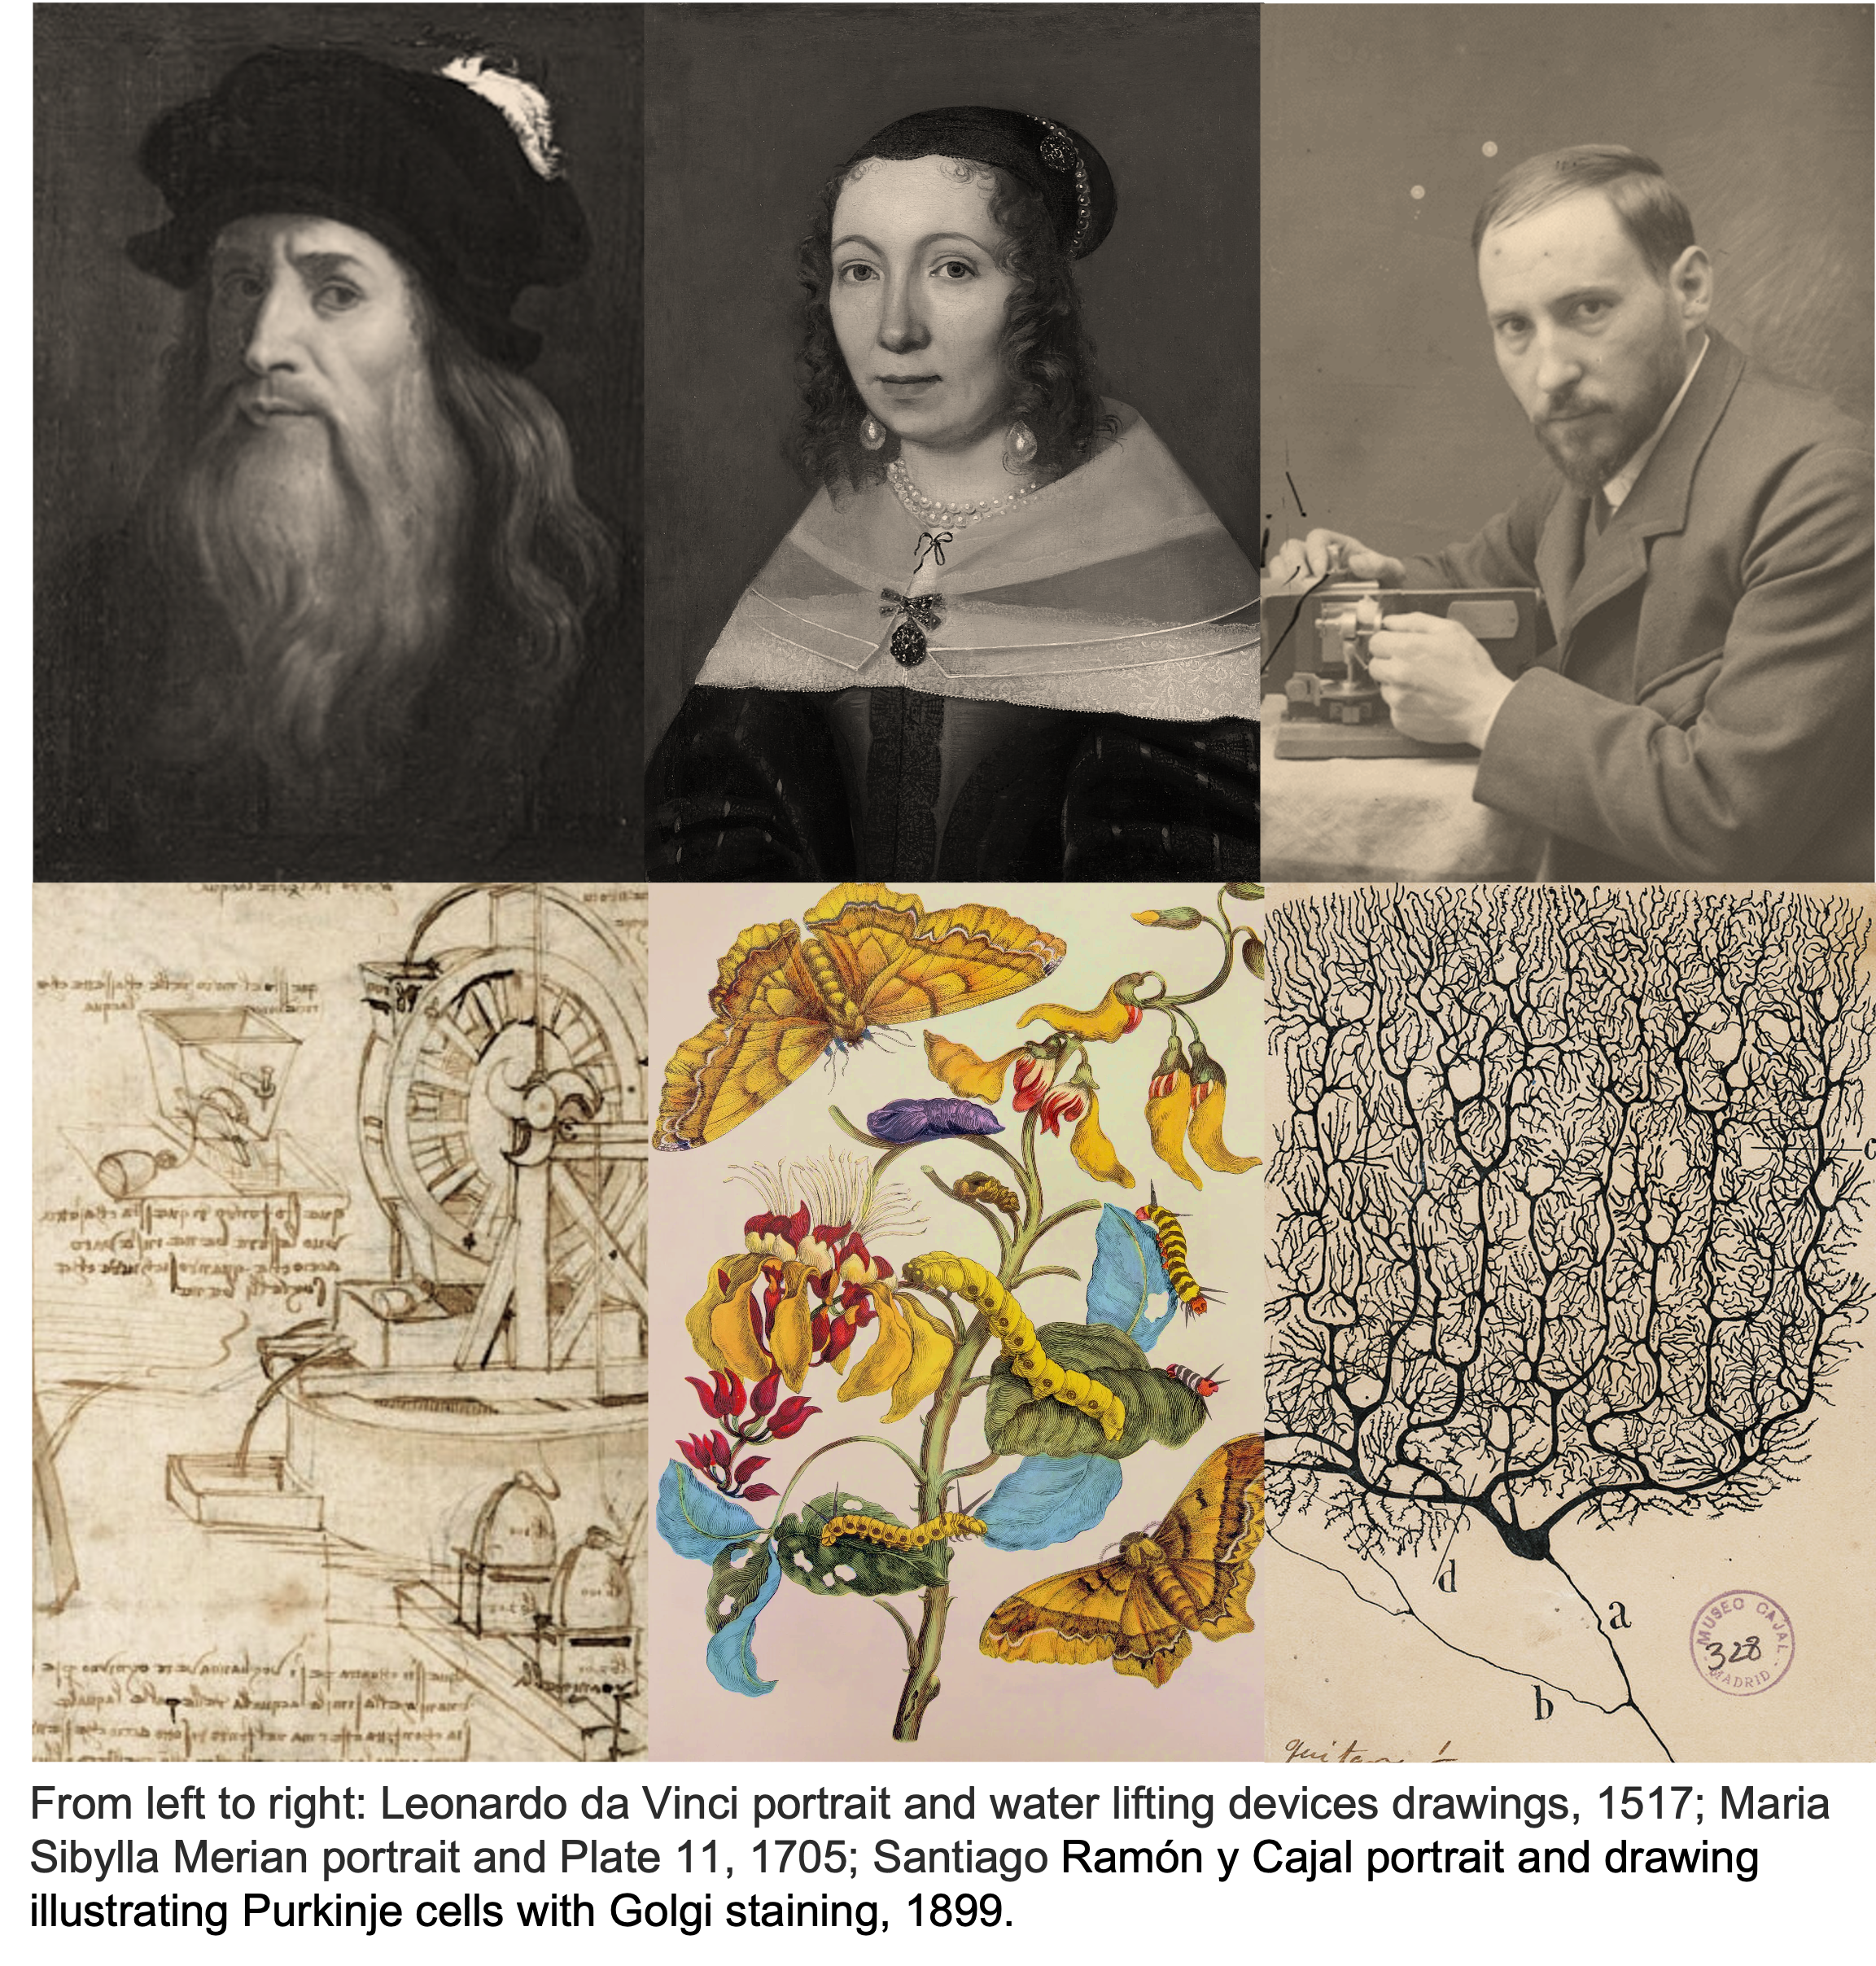 3 giants of art and science and their works